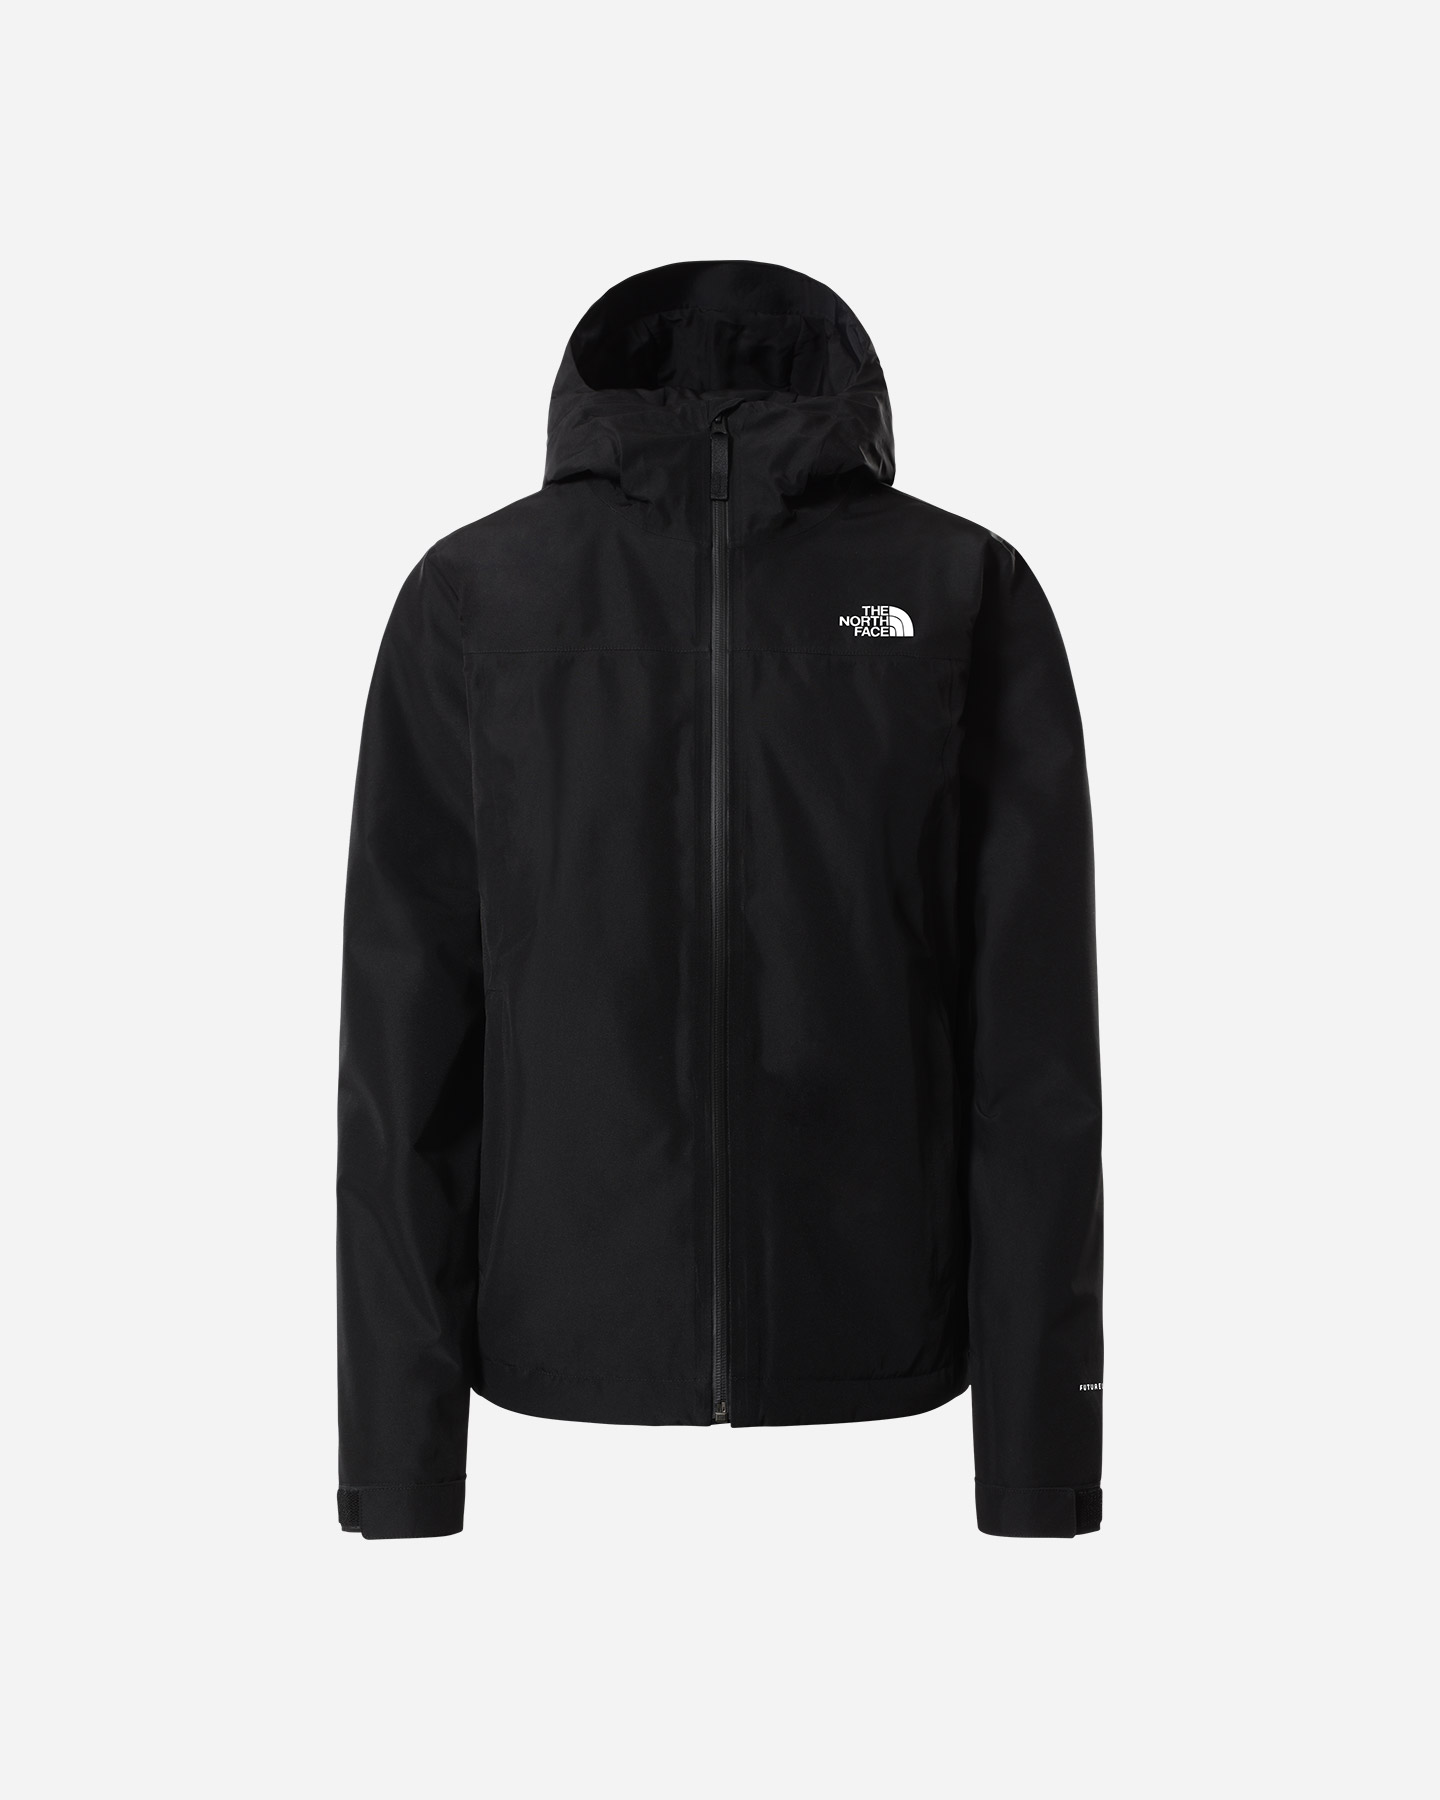 THE NORTH FACE - DRYZZLE INSULATED W